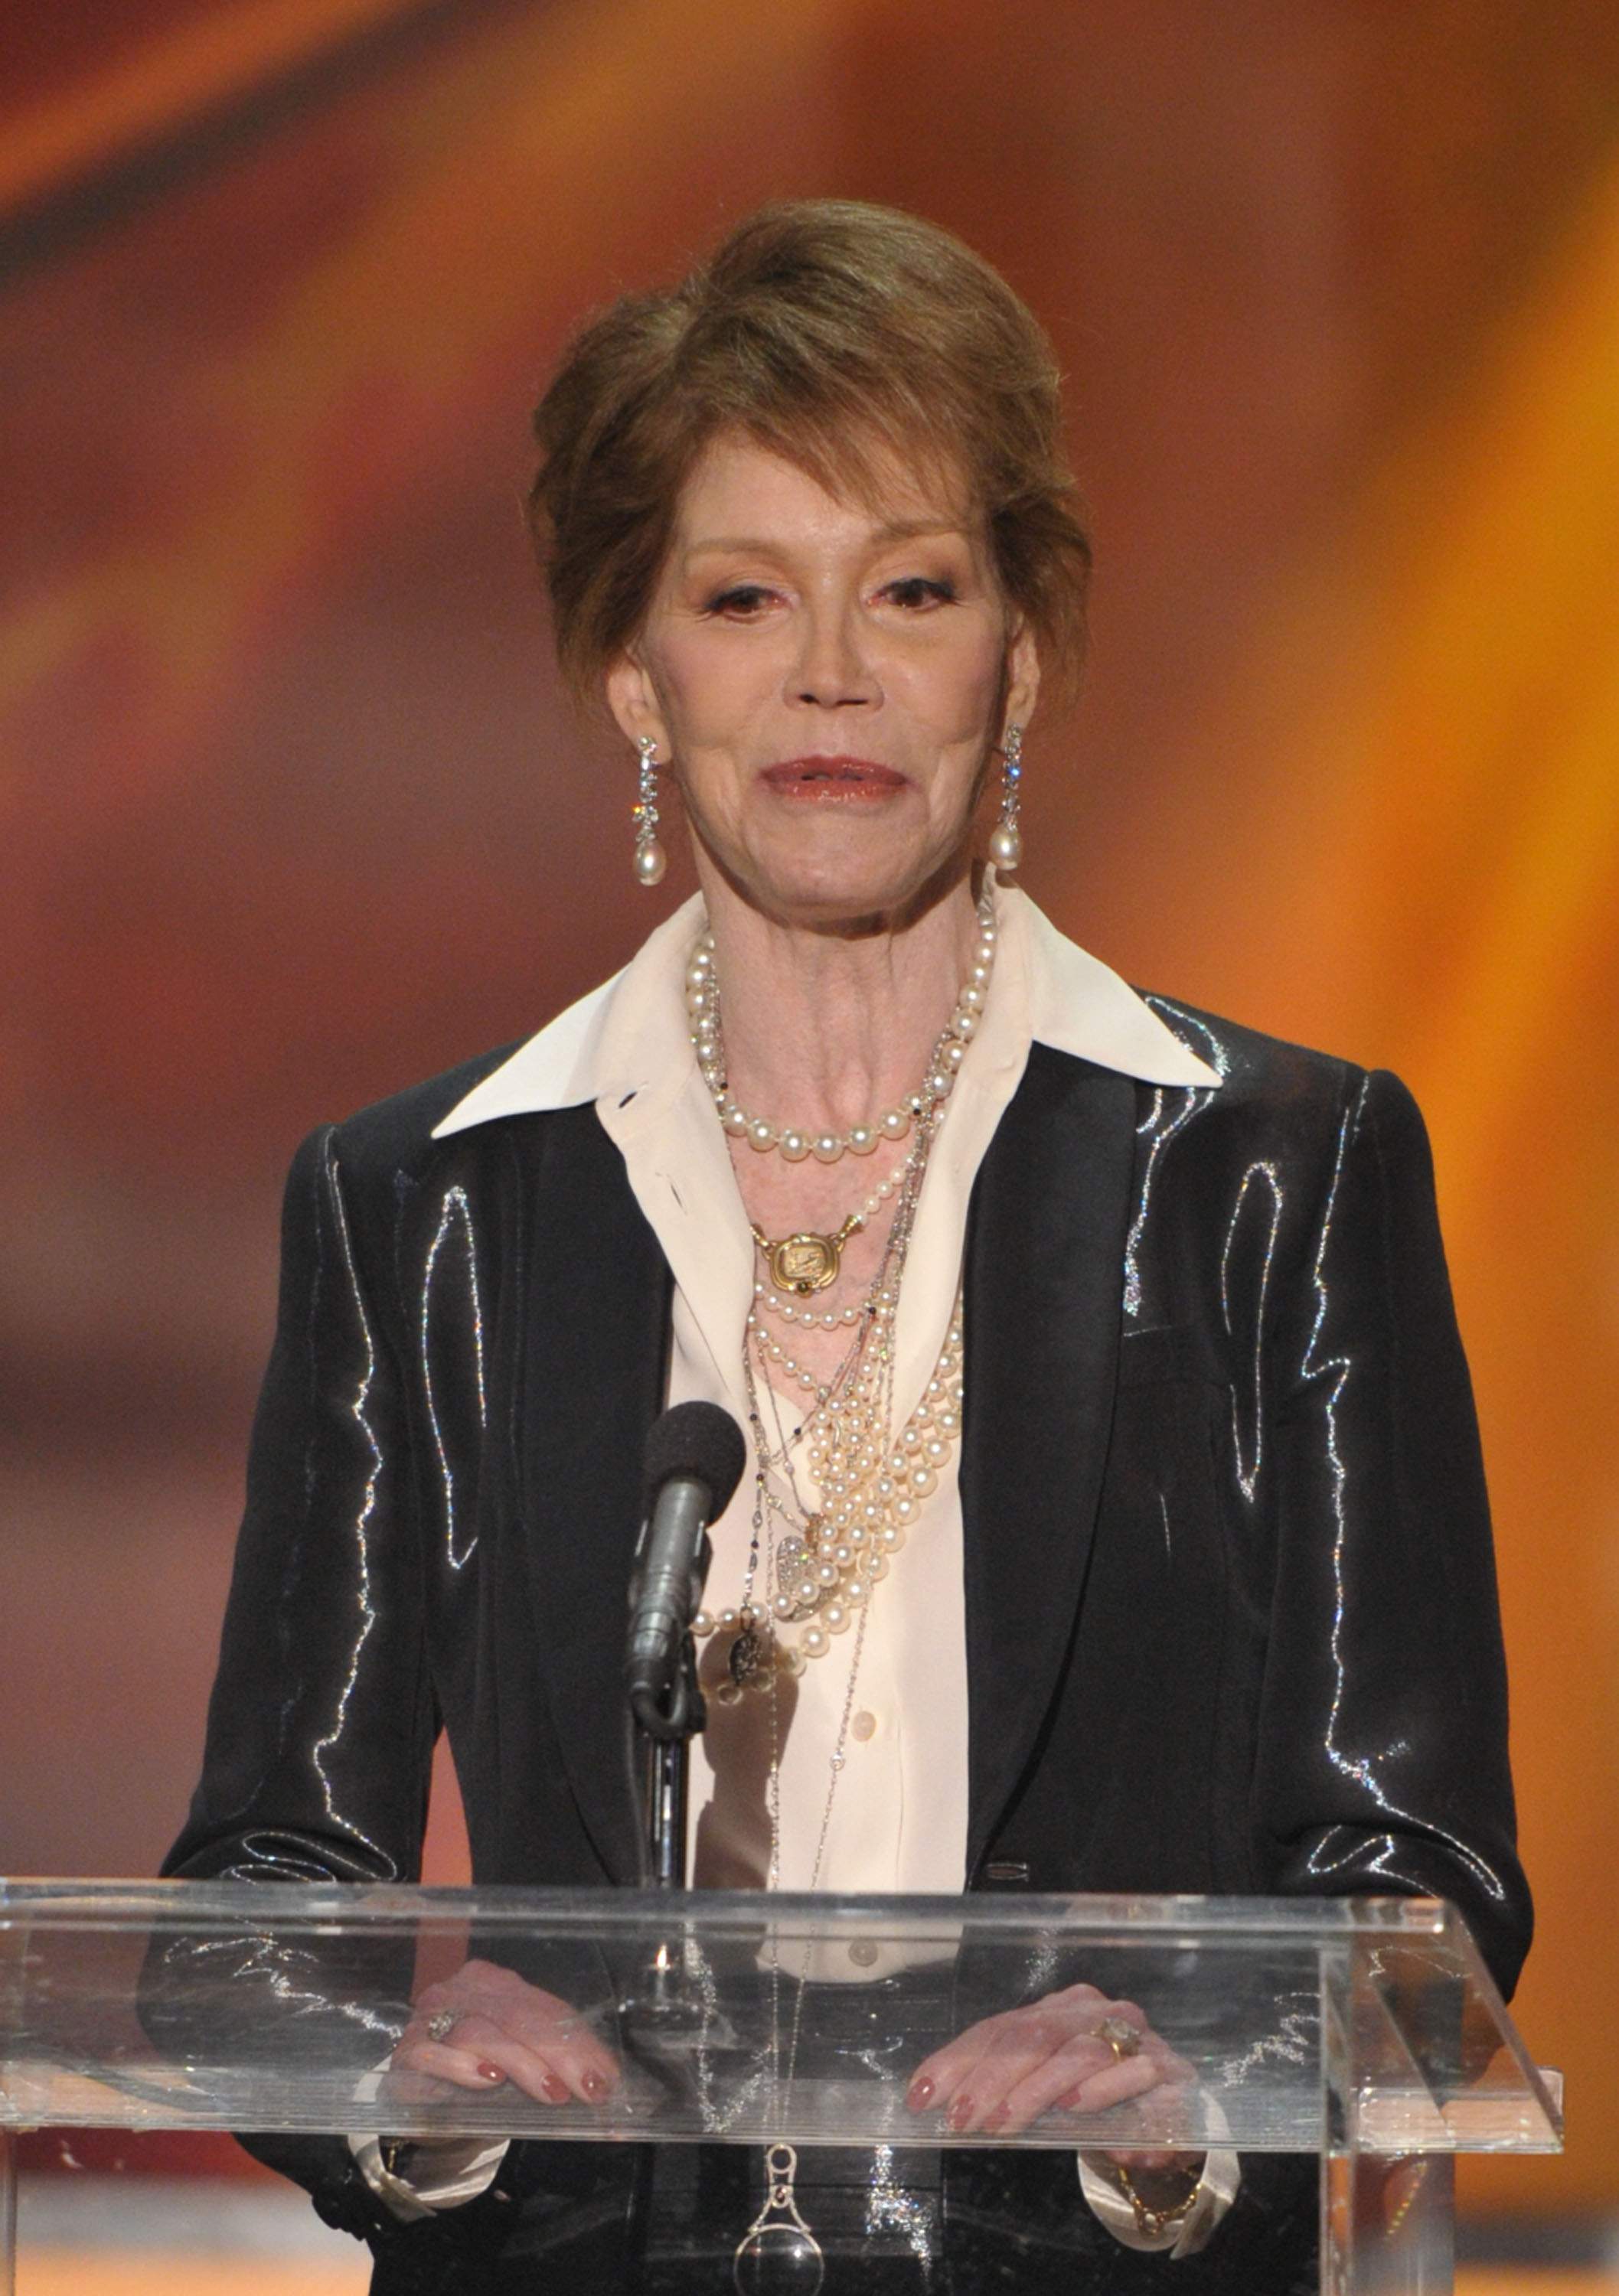 Actress Mary Tyler Moore speaks onstage during The 18th Annual Screen Actors Guild Awards broadcast on TNT/TBS at The Shrine Auditorium on January 29, 2012 in Los Angeles, California | Source: Getty Images